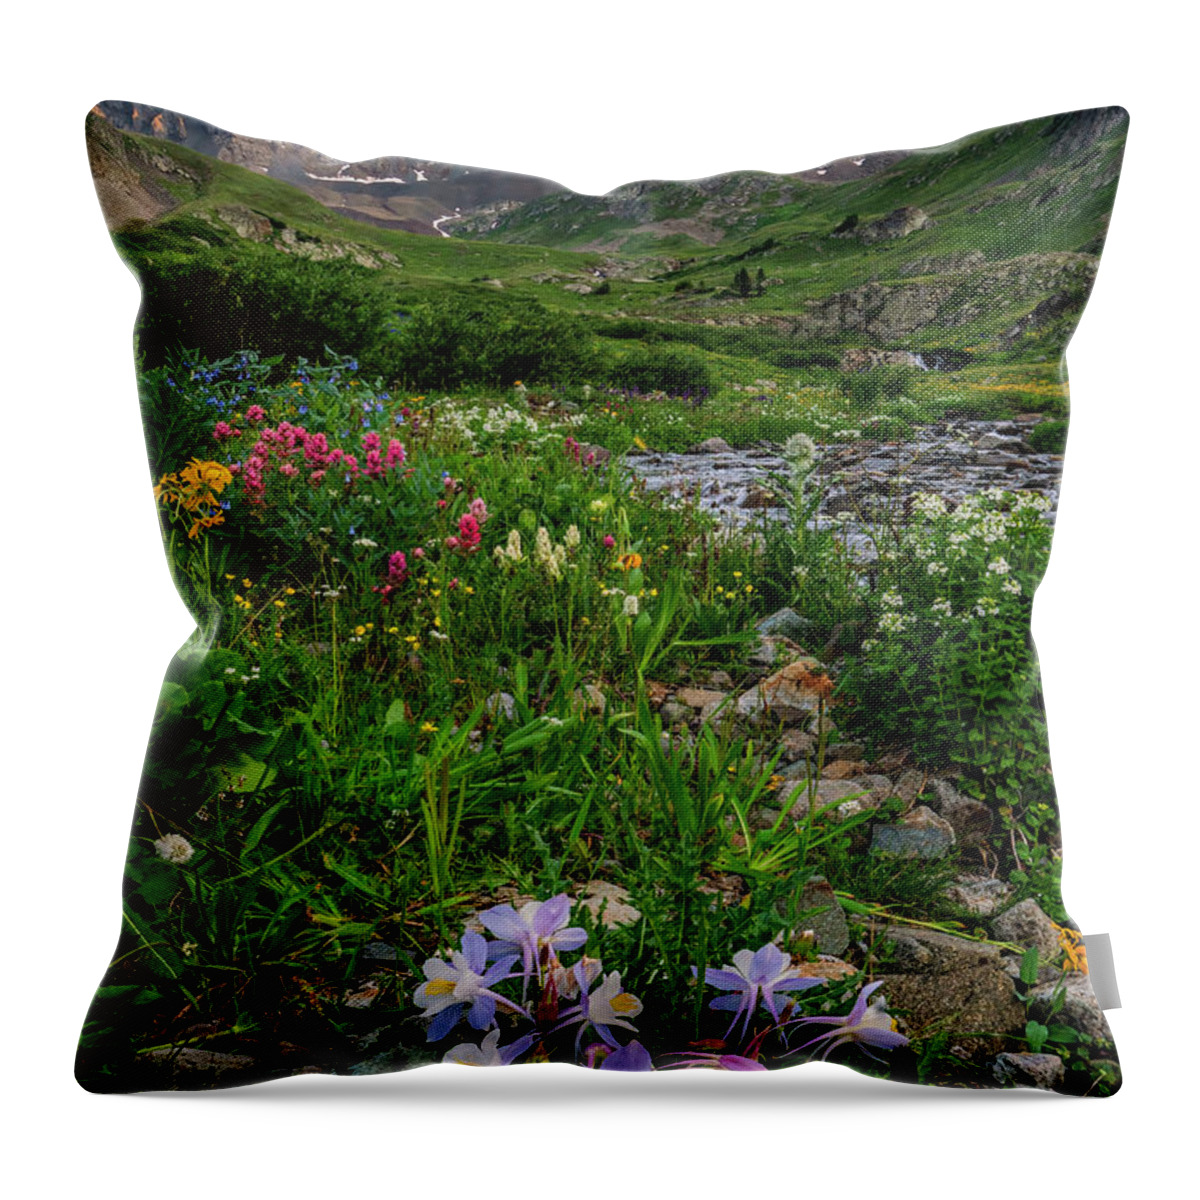 Colorado Throw Pillow featuring the photograph Summer's Glory by David Soldano